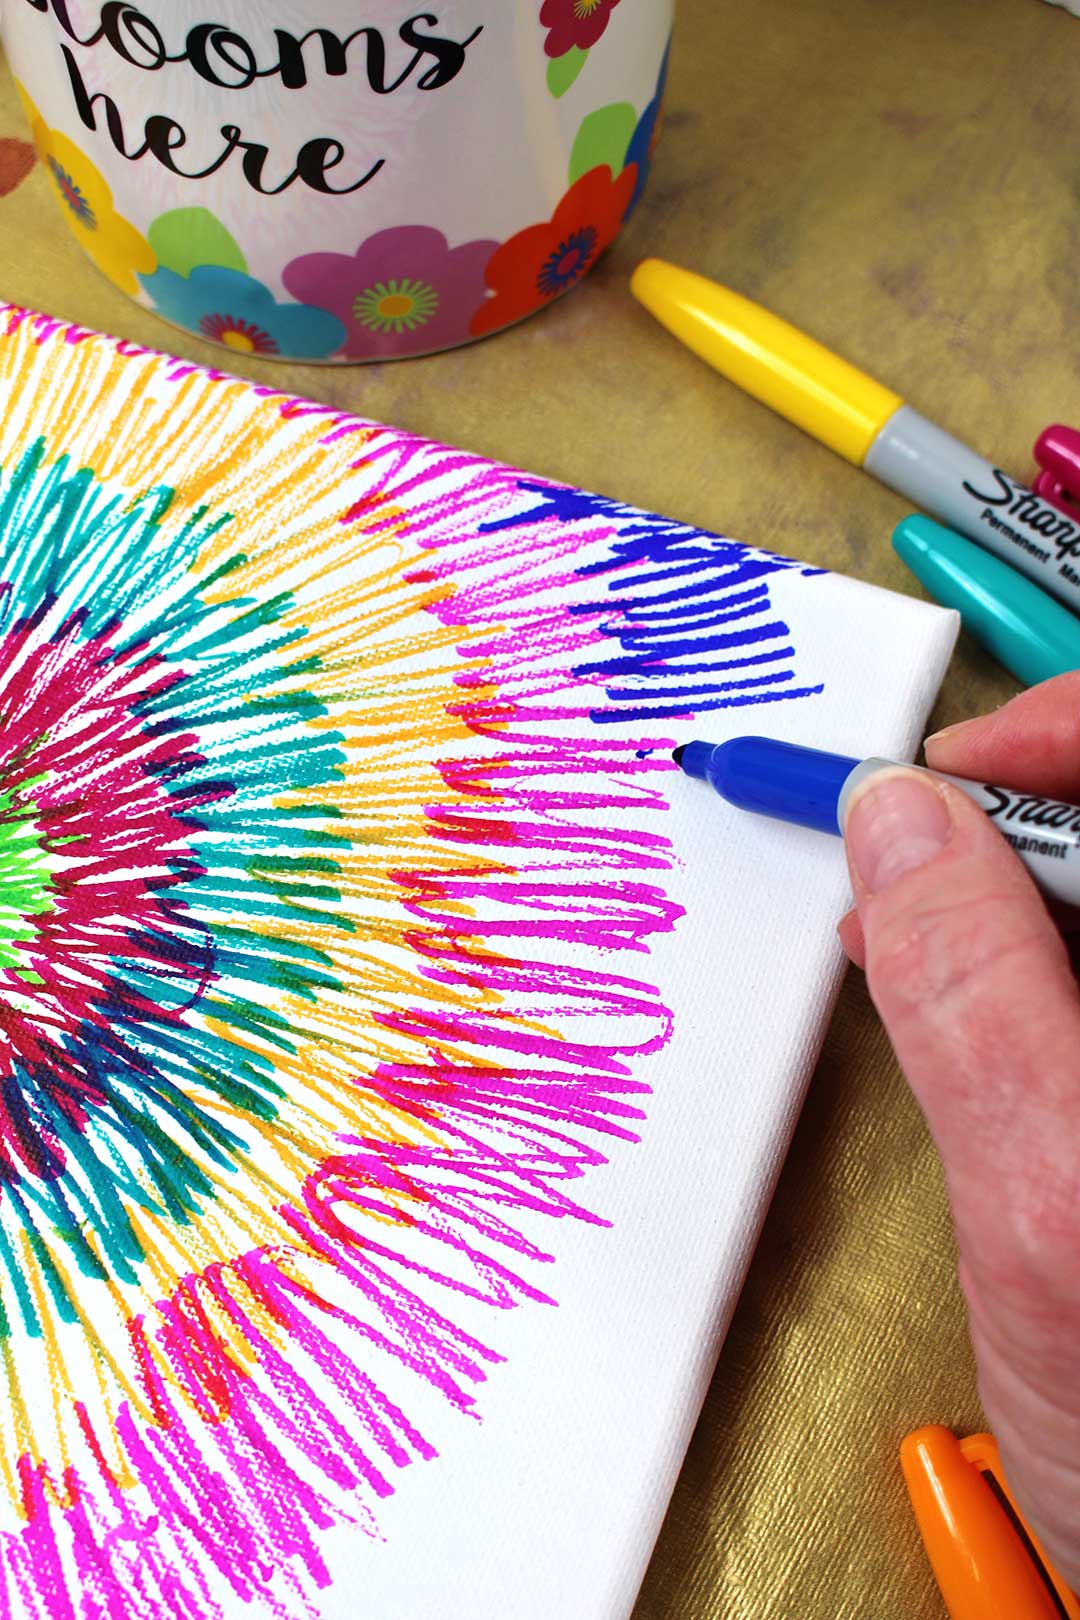 33 Gorgeous Sharpie Art Ideas For Kids and Adults